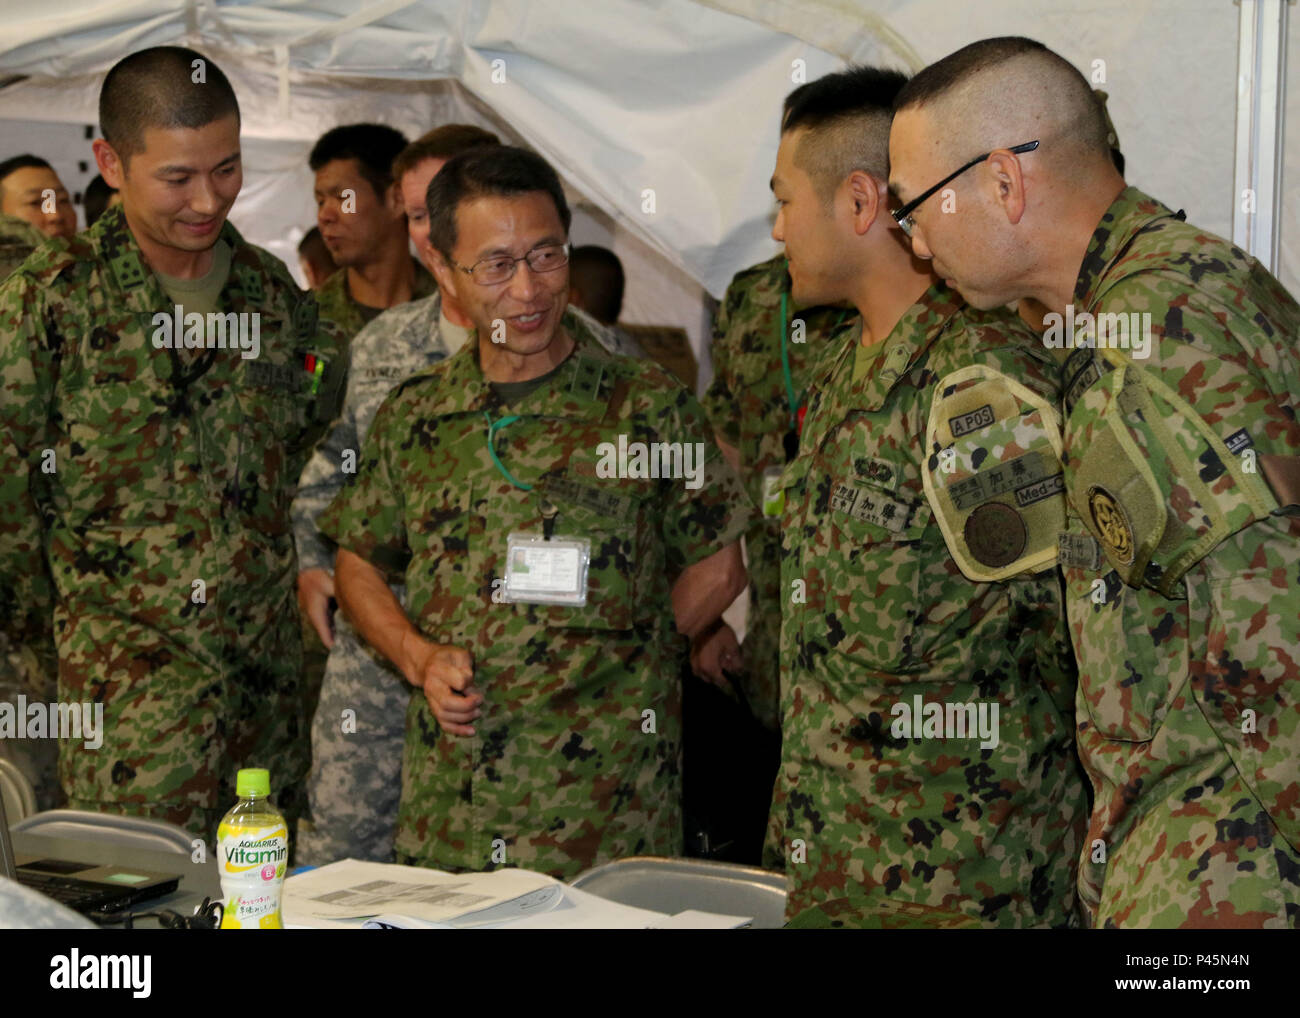 Maj. Gen. Mitsuhiko Horikiri, vice chief of staff (international), Japan Ground Self-Defense Force Central Readiness Force, visits with Japan Ground Self-Defense Force service members Cpt. Ikuo Igarashi (left), training officer, Sgt. Yuichi Kato, infantry man and Cpt. Yasuhiro Nakai, operations officer, during Imua Dawn 2016, Sagamihara Depot, Japan, June 18, 2016. Exercises such as Imua Dawn16 are fundamental training opportunities for military forces to refine techniques to rapidly respond to natural disasters and crises in order to help mitigate human suffering and greater property damage.  Stock Photo